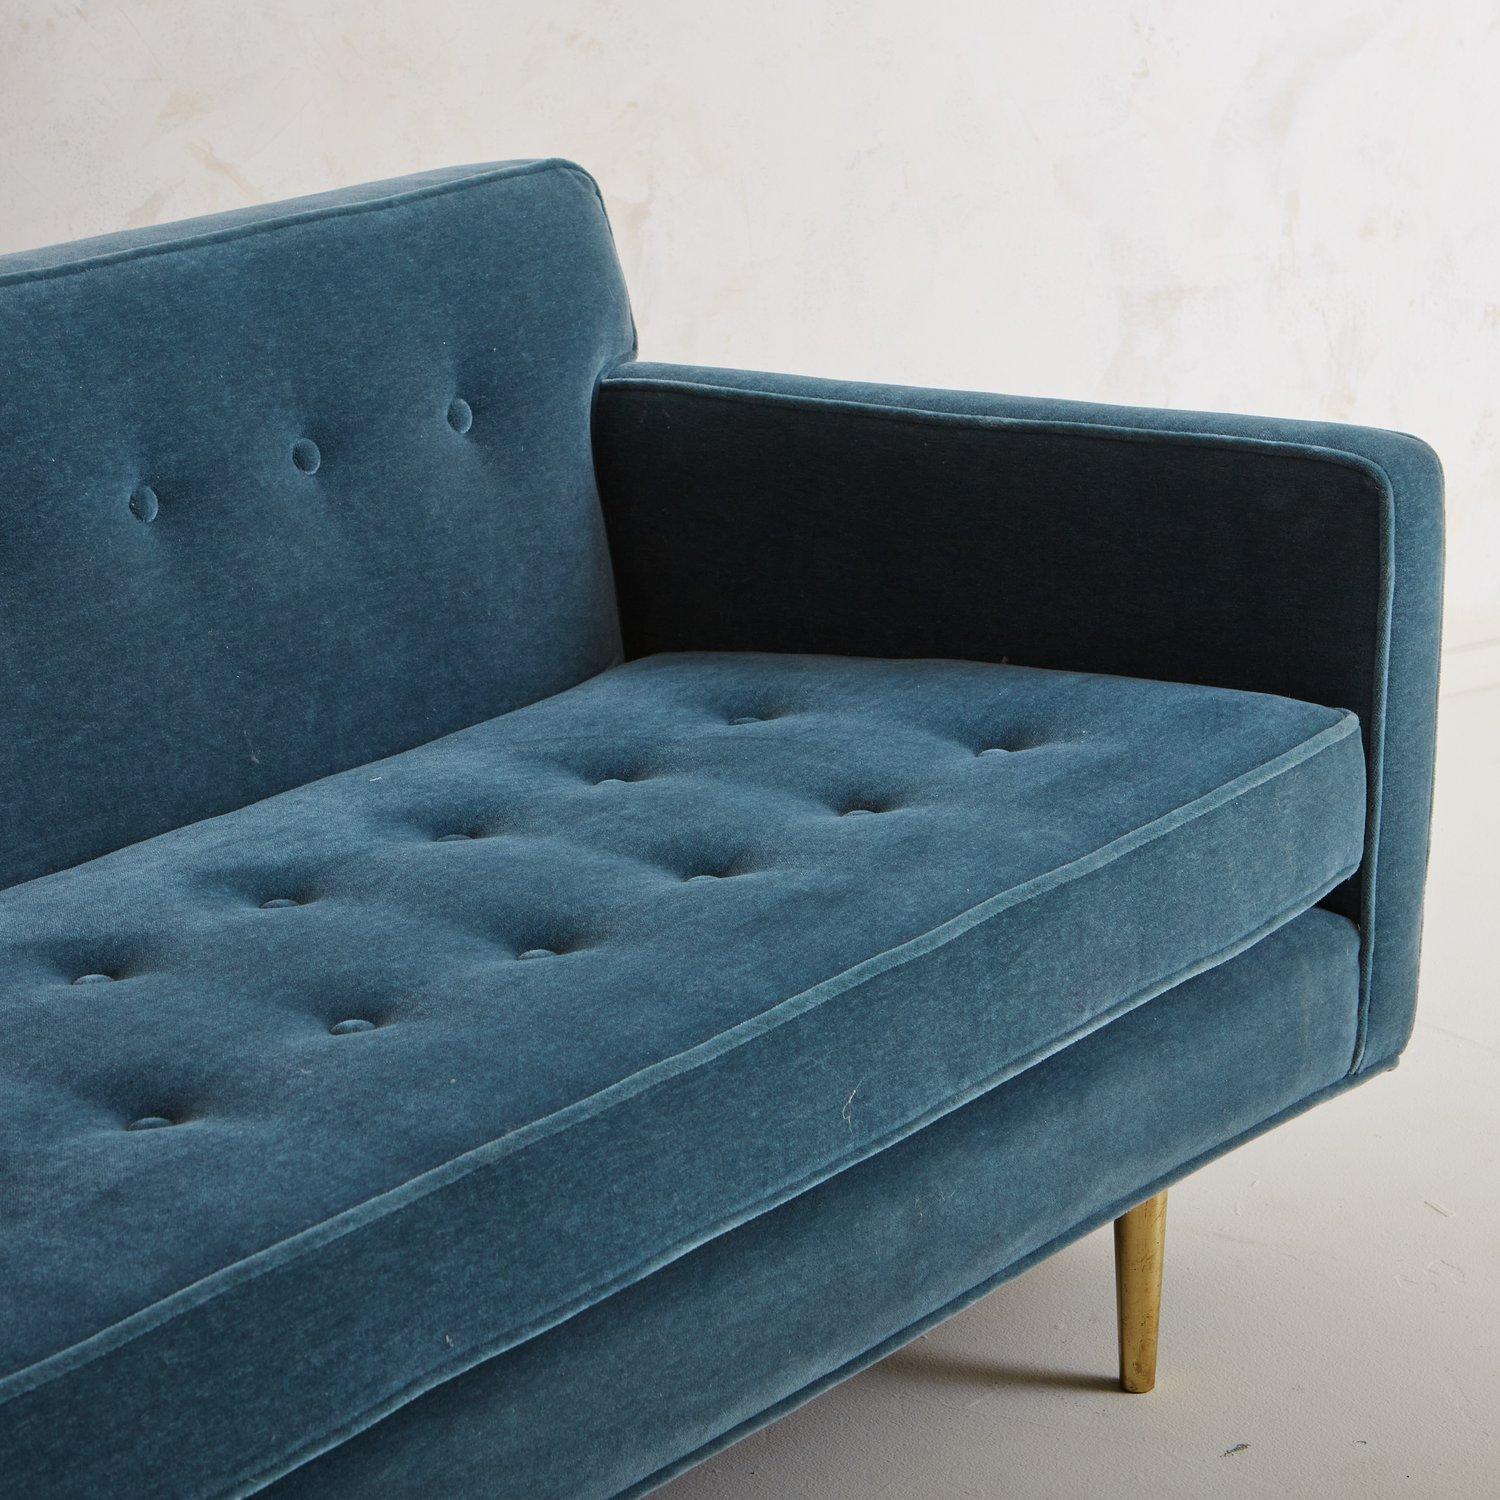 Tufted Sofa in Blue Mohair Attributed to Edward Wormley for Dunbar, USA 1950s For Sale 1